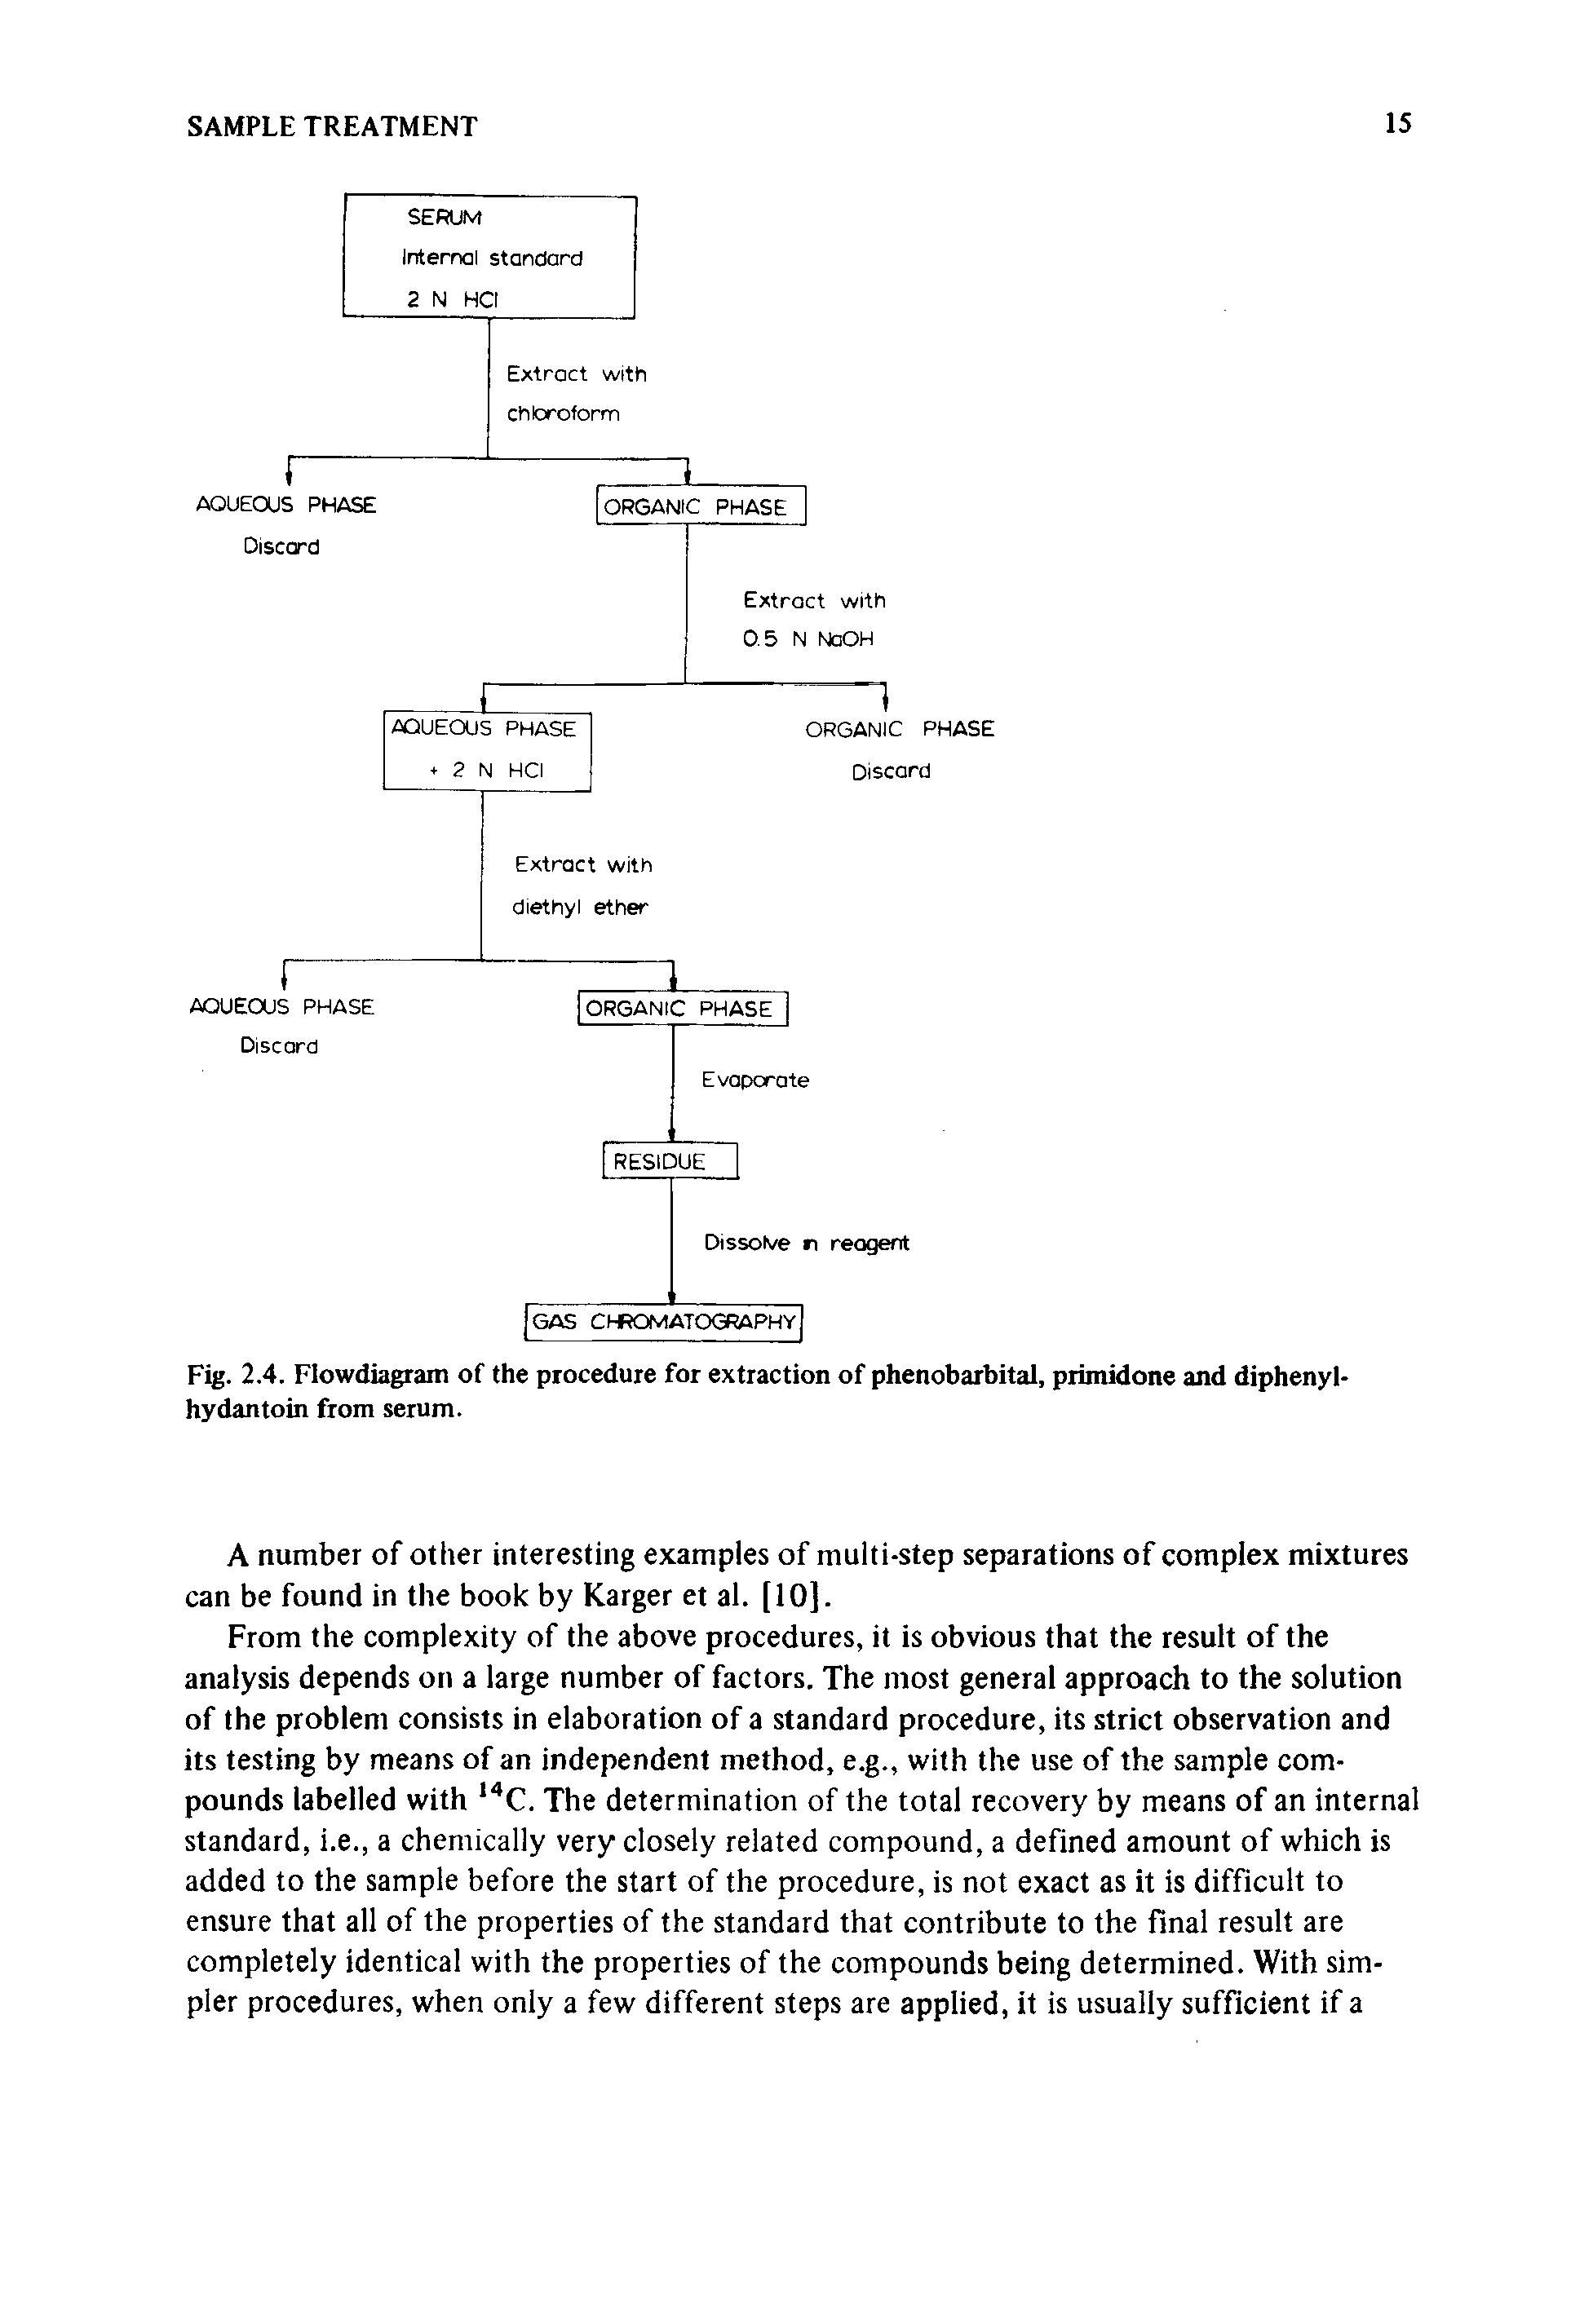 Fig. 2.4. Flowdiagram of the procedure for extraction of phenobarbital, primidone and diphenyl-hydantoin from serum.